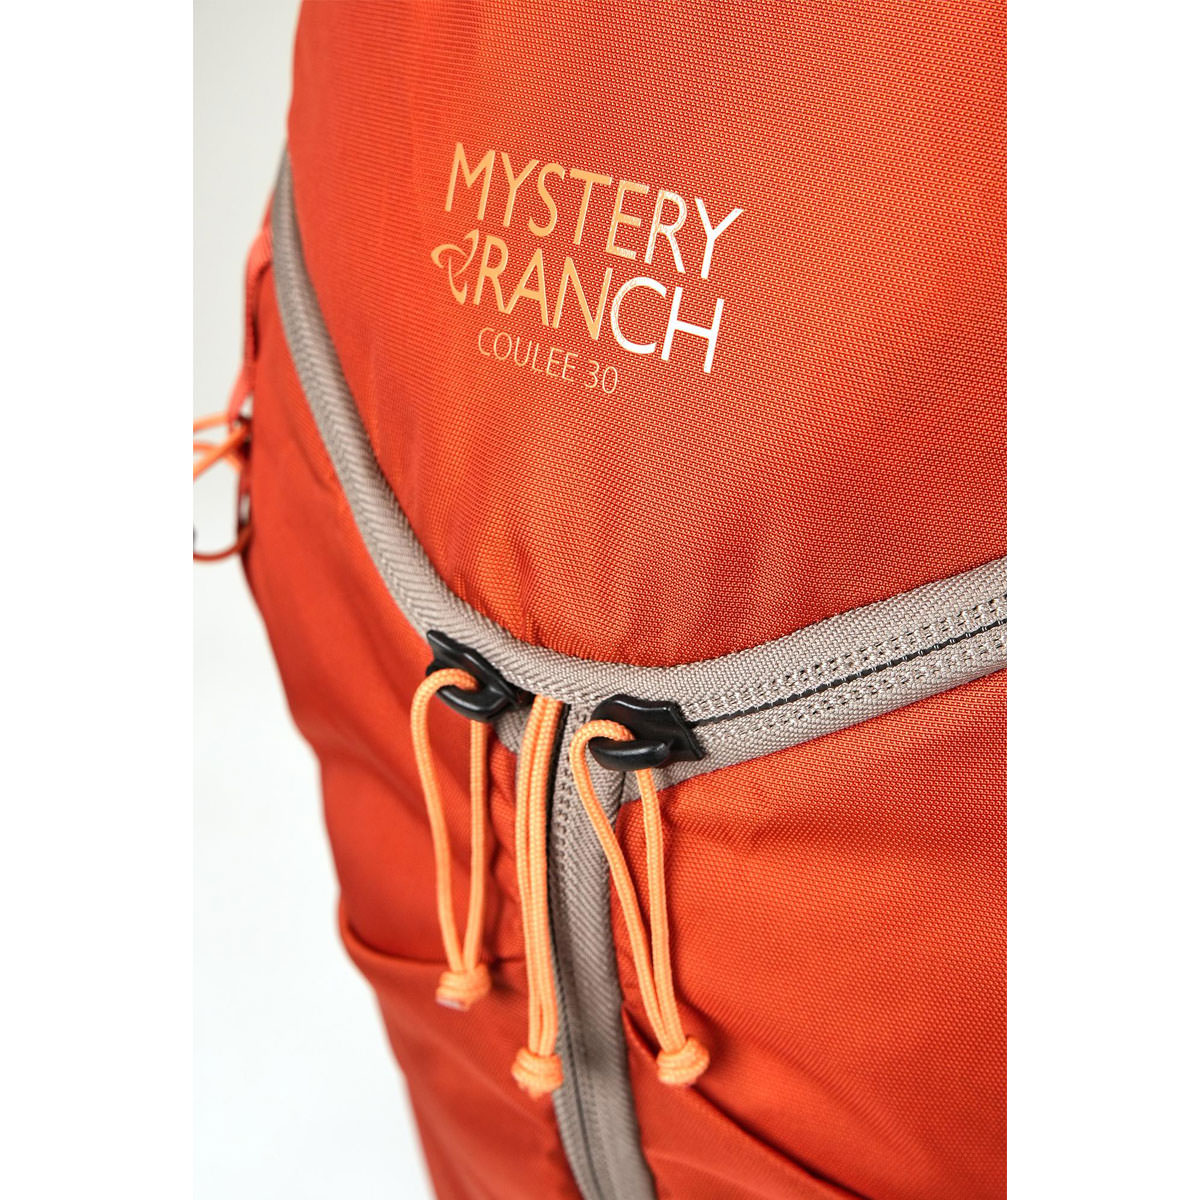 MysteryRanch(ミステリーランチ) Women's Coulee 30